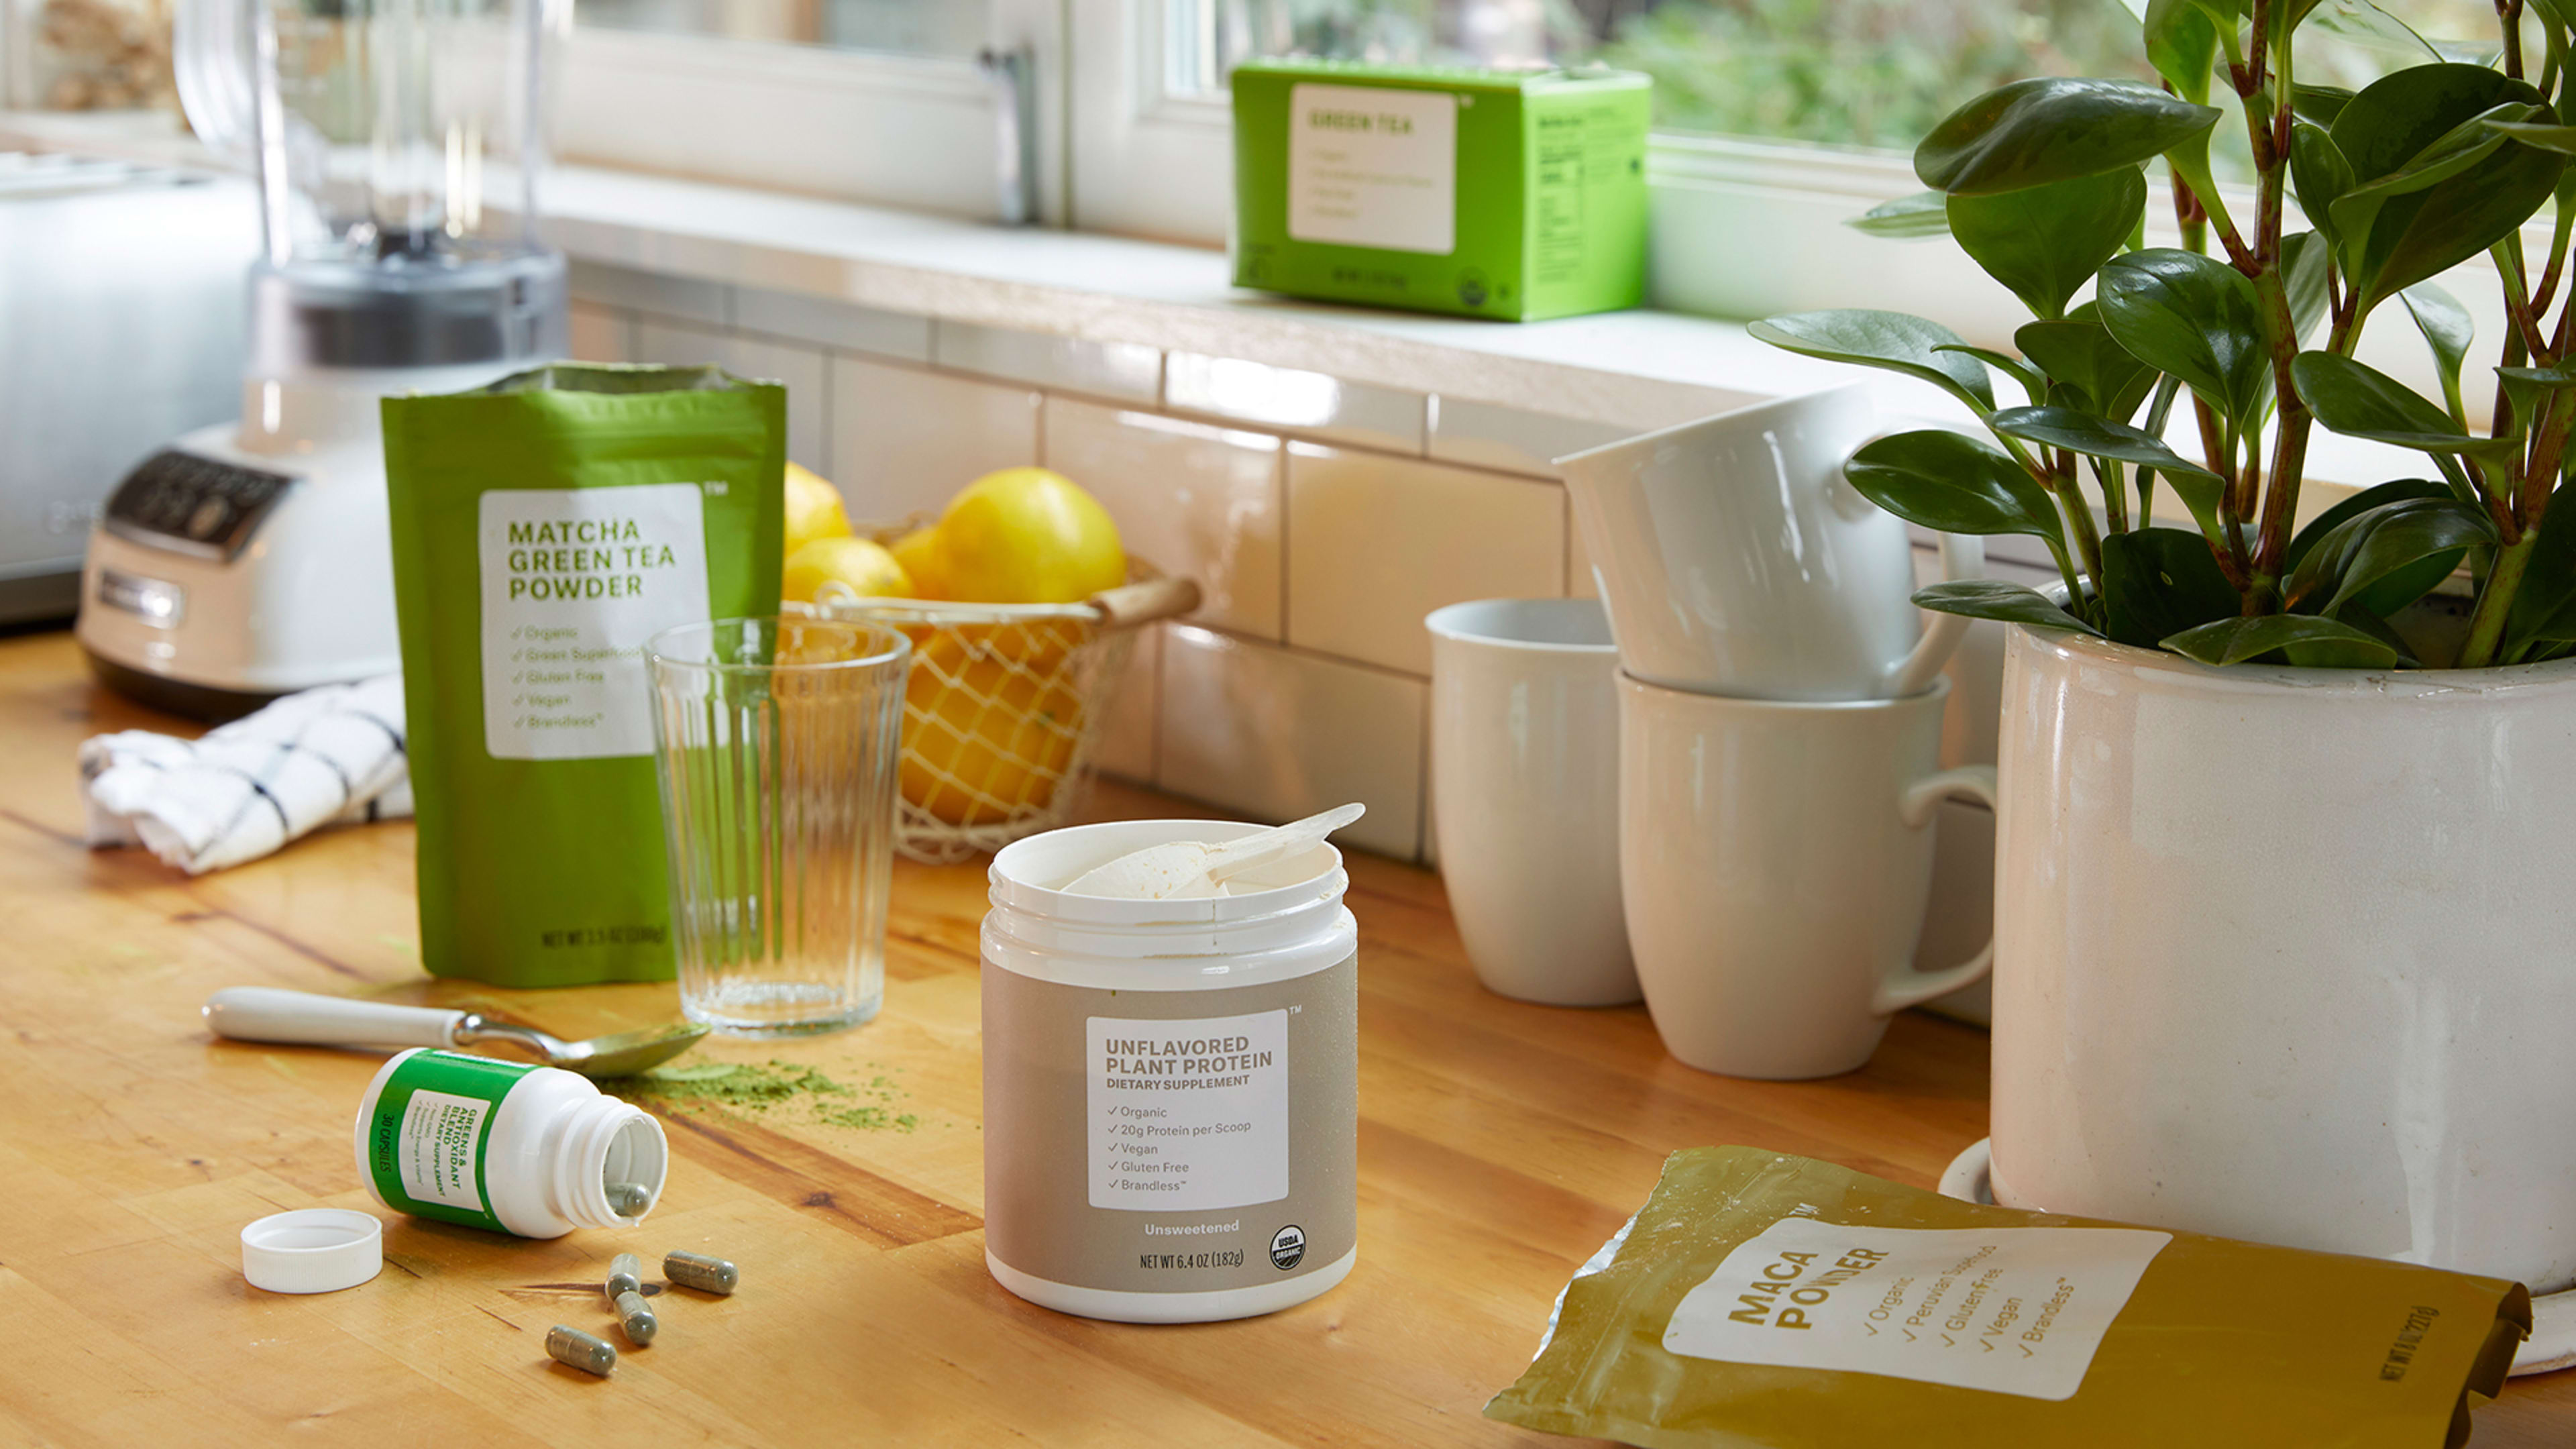 Brandless expands into wellness with supplements, cleanses, and other Goop-style items